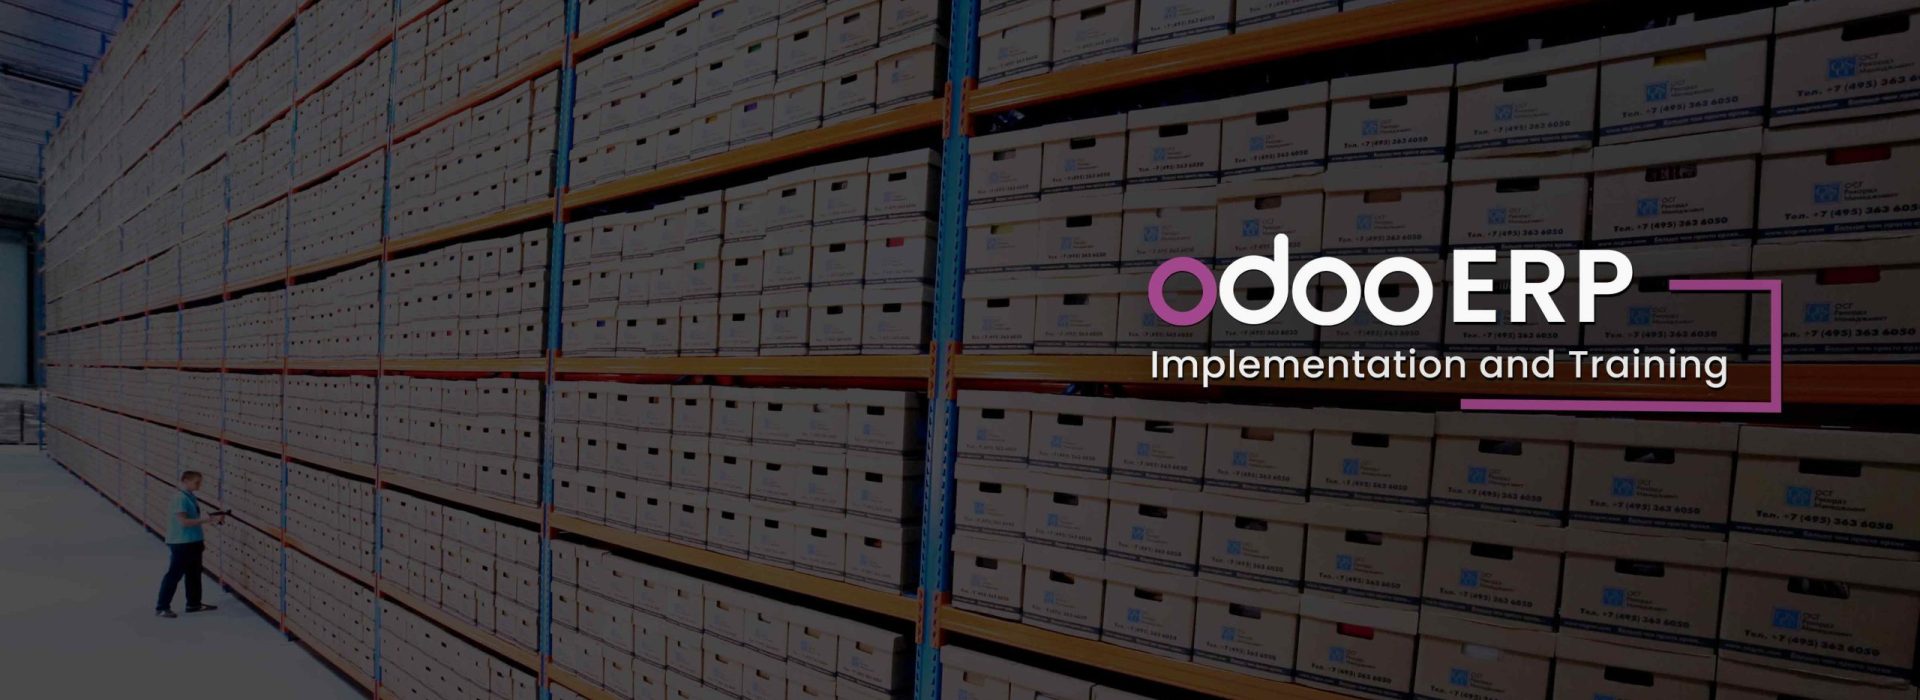 Odoo Implementation and Training